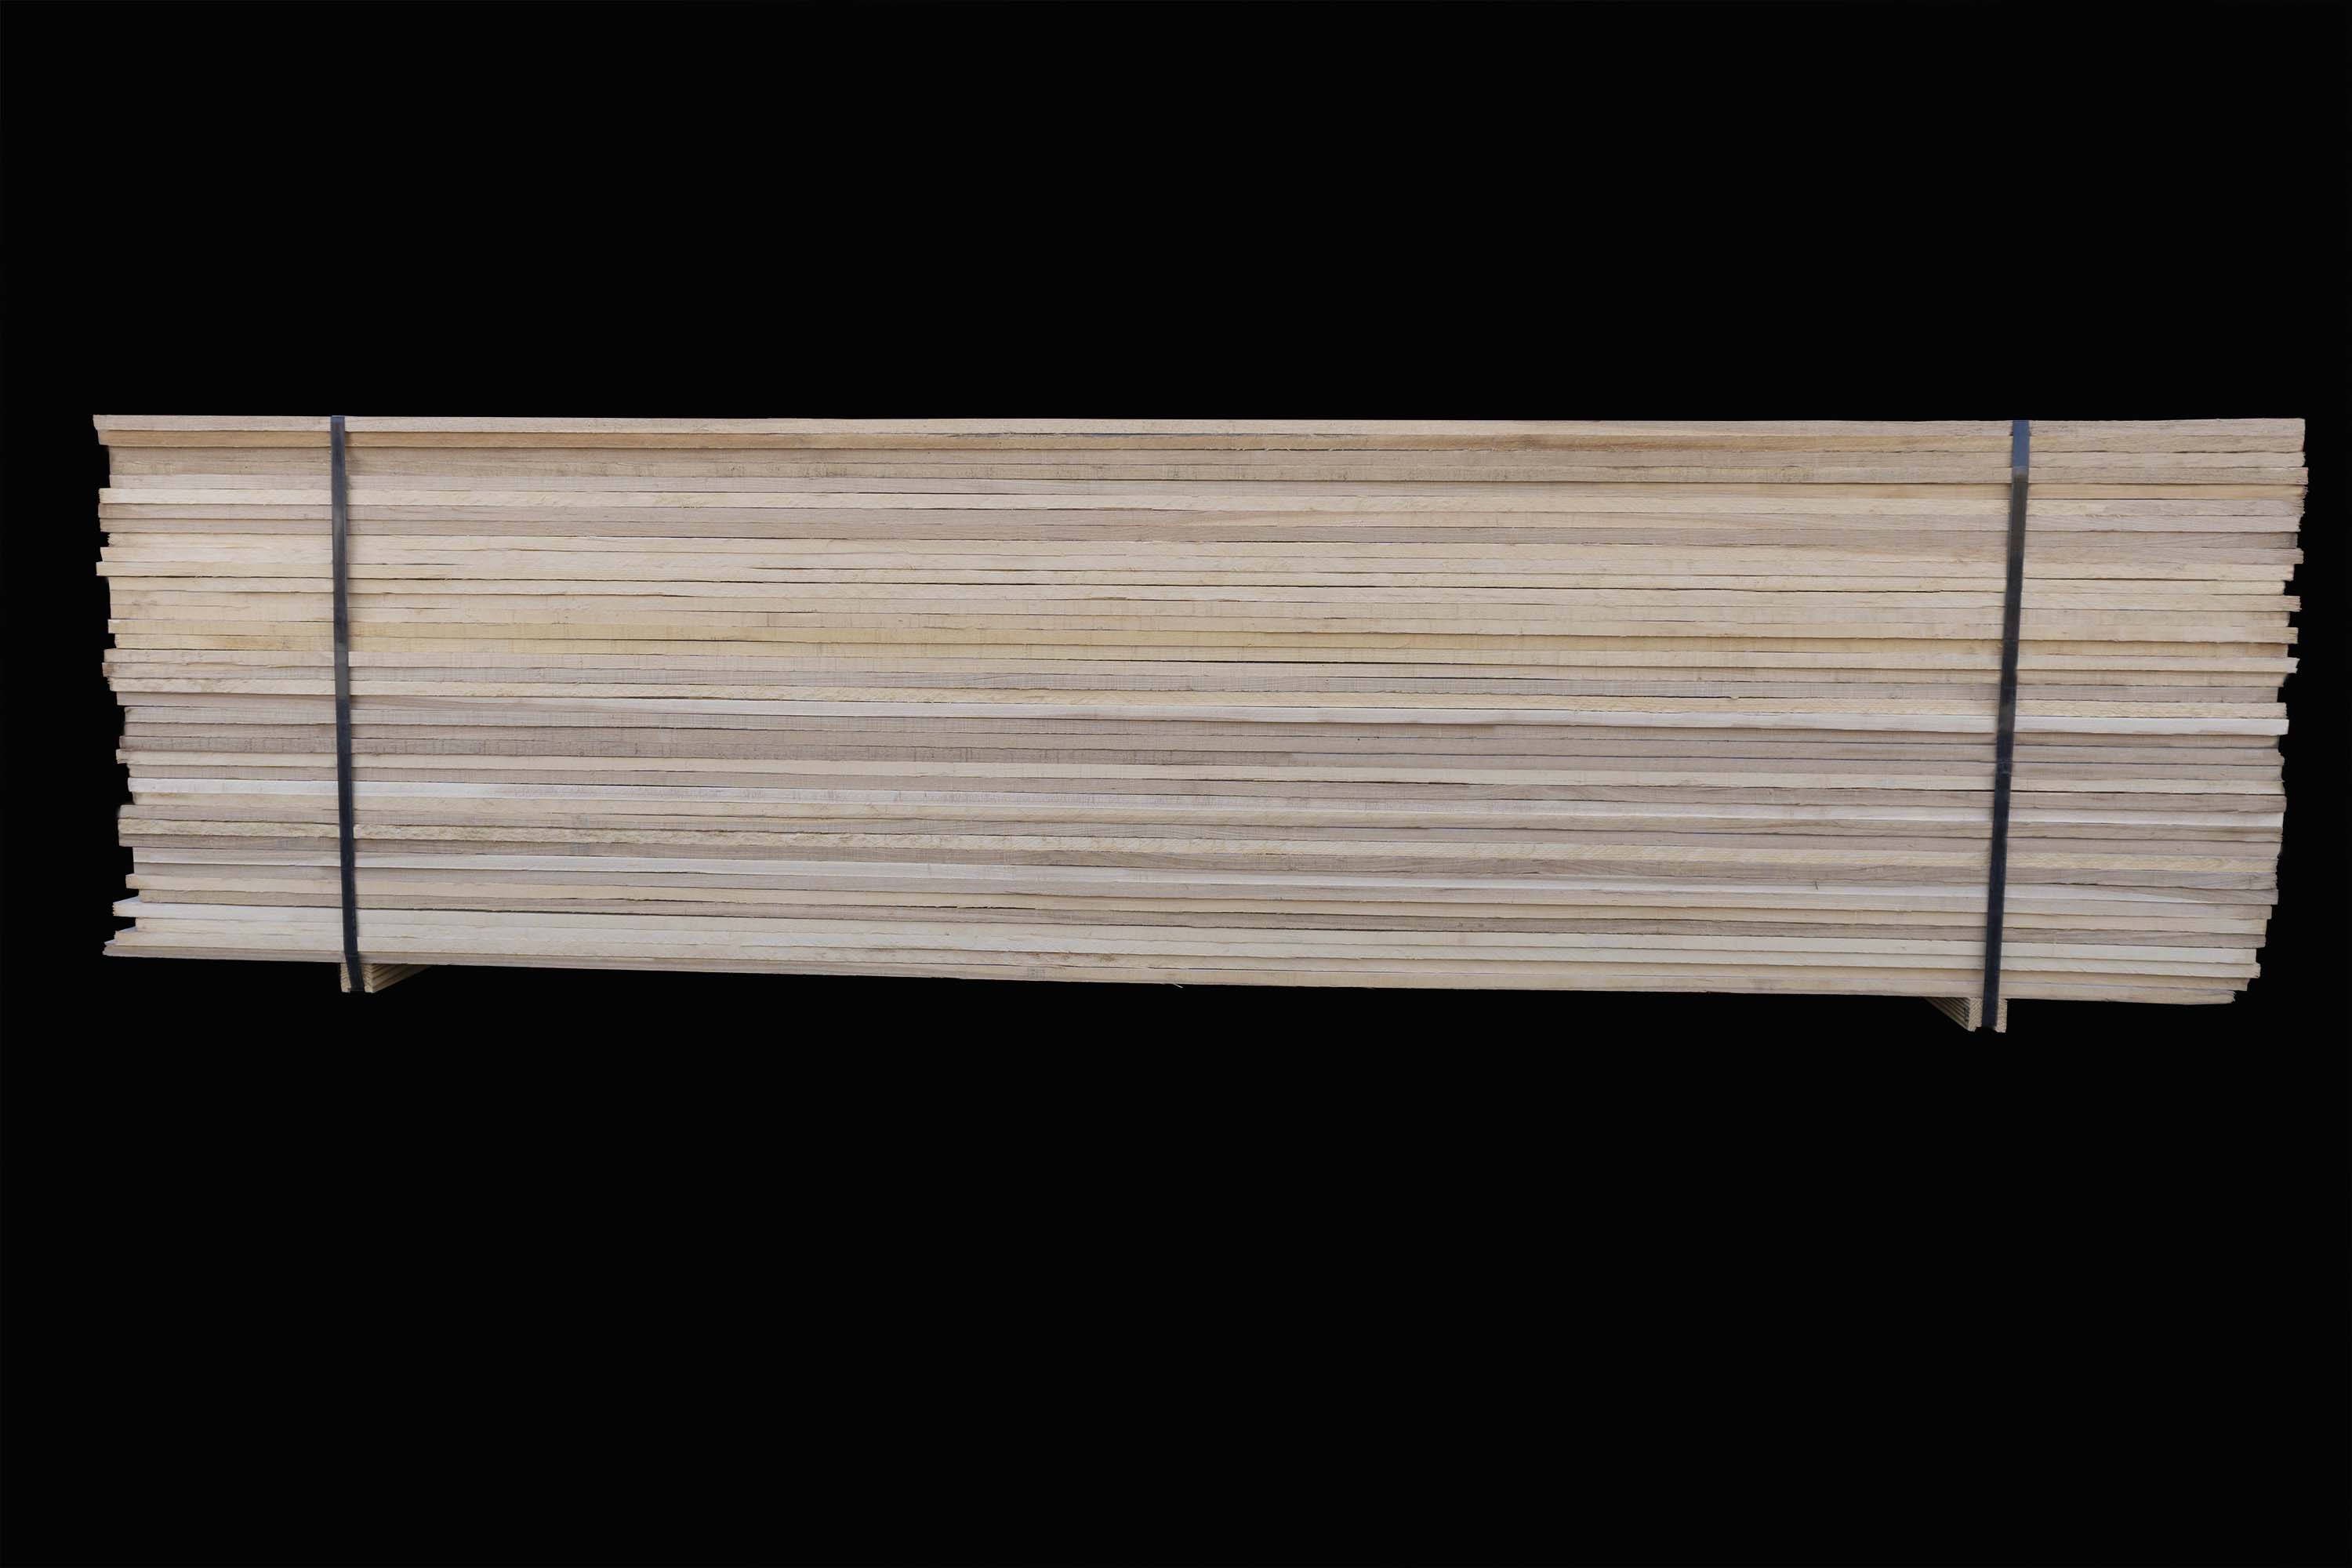 4/4 Hickory Prime - 11'-12' - S2S - Side